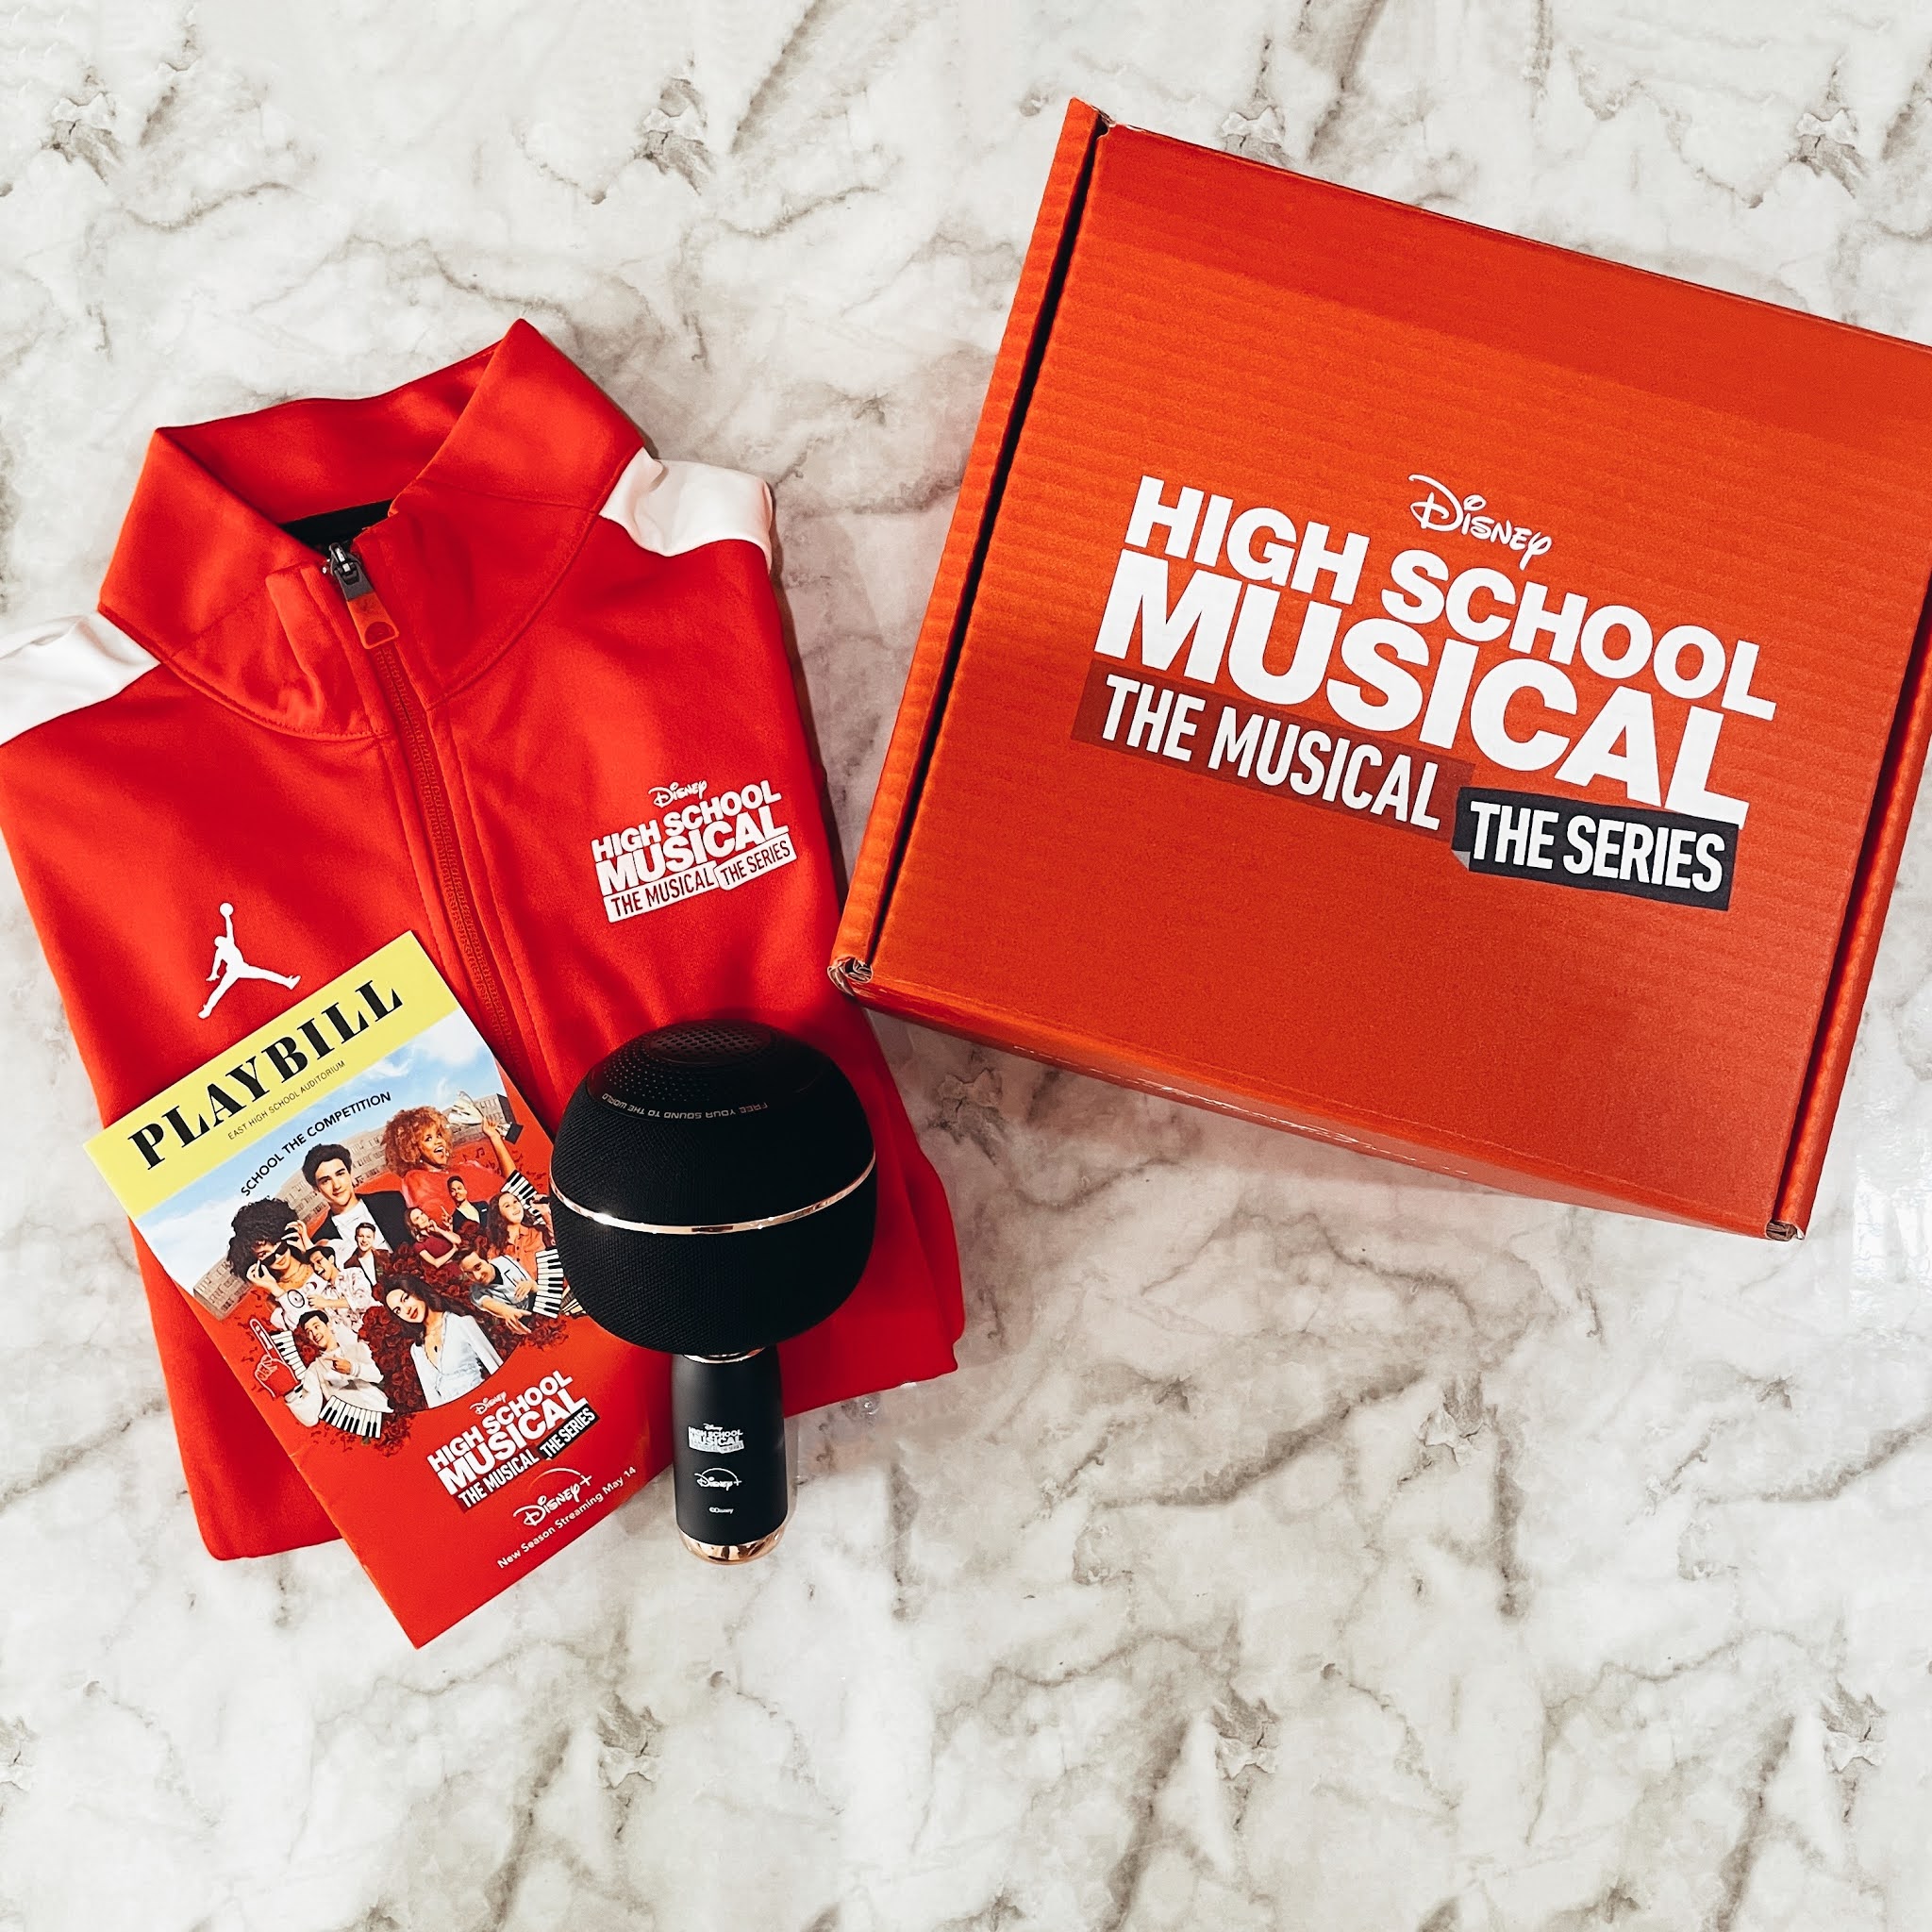 High School Musical: The Musical: The Series' premiering on Disney+ on May  14th - THE PATRICIOS